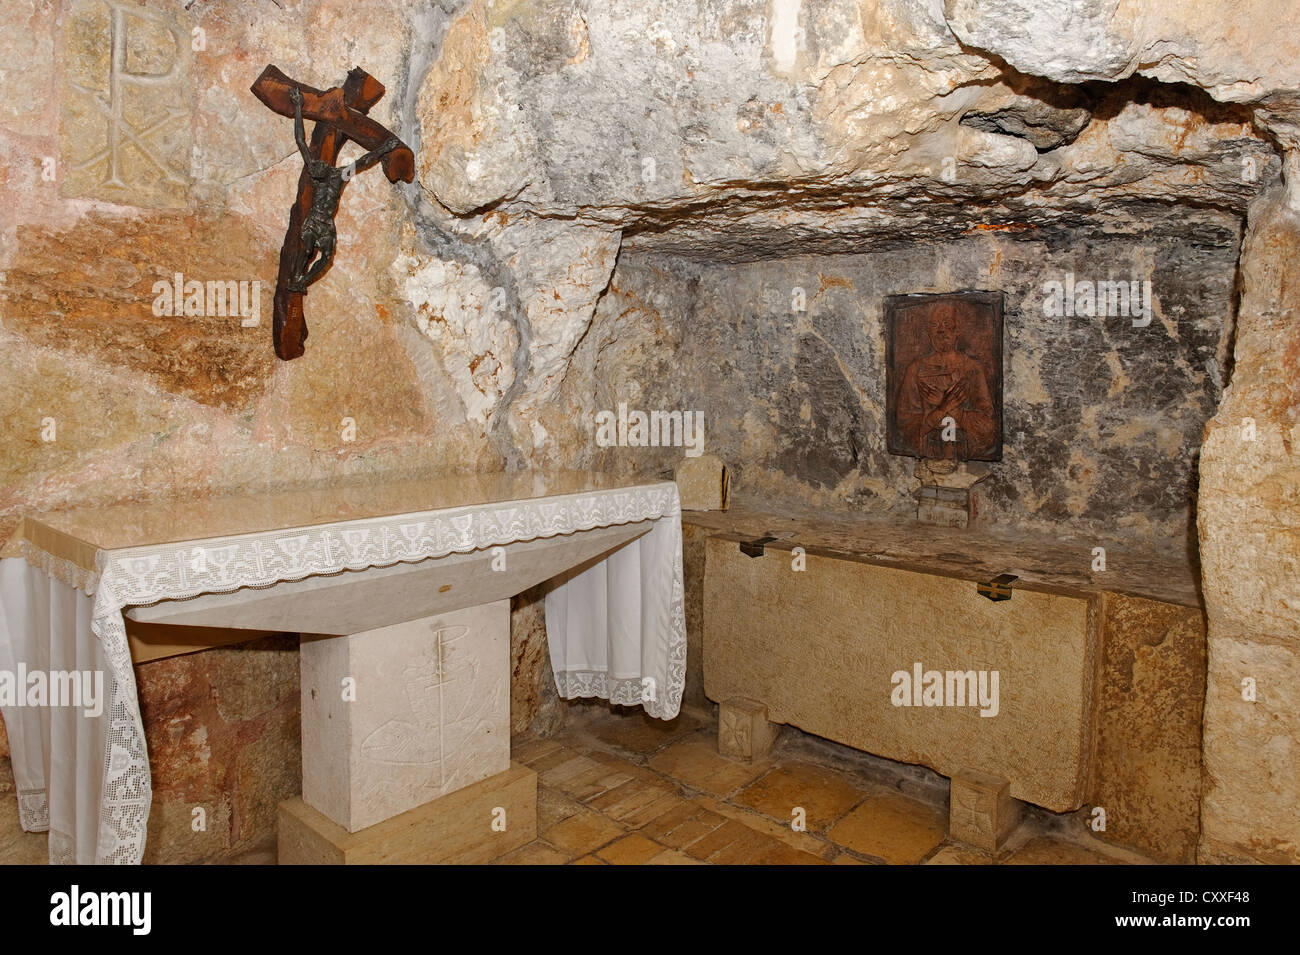 Grave of St. Jerome, crypt, grottoes under St. Catherine's Church near the Church of the Nativity, Bethlehem, West Bank, Israel Stock Photo